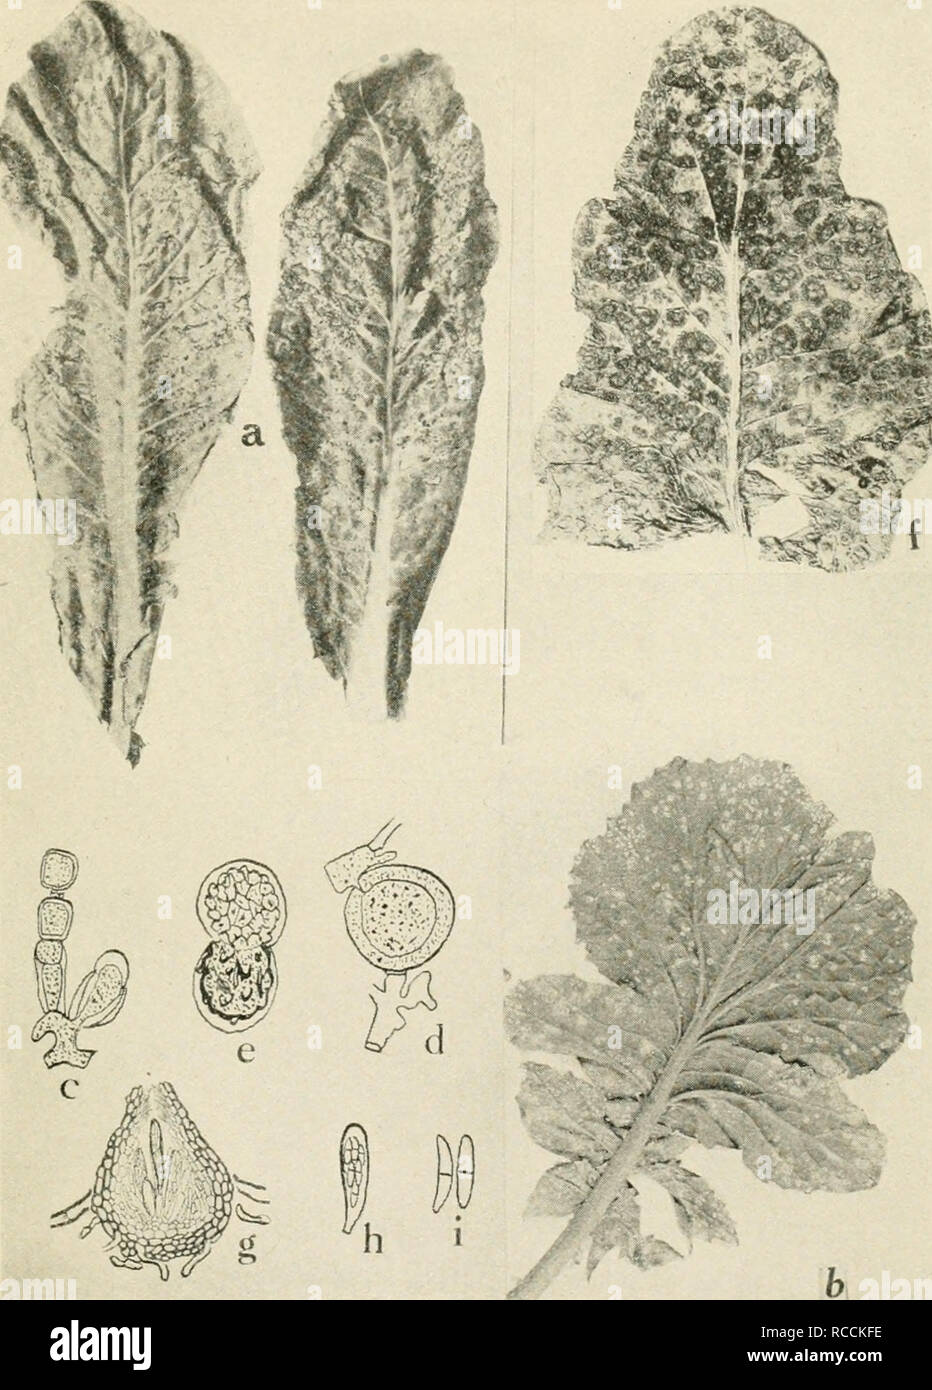 . Diseases of truck crops and their control. Vegetables. Fig. 33. Diseases of the Cauliflower axd Radish. a. Spot disease of cauliflower (after McCuIloch), b. white rust of radish, c. conidio- phore of the white rust fungus, Cyslopus candidus, d. fertilization in Albugo Candida, e. germination of the oospore of Albugo Candida, f. ring spot on cauliflower head, g! perithecium of Mycospho'reUa brassicicola, h. ascus of Mycospha-rella brassicicola, i. ascospores of Mycosphcerella brassicicola {g. to i. after Osmun and Anderson).. Please note that these images are extracted from scanned page image Stock Photo